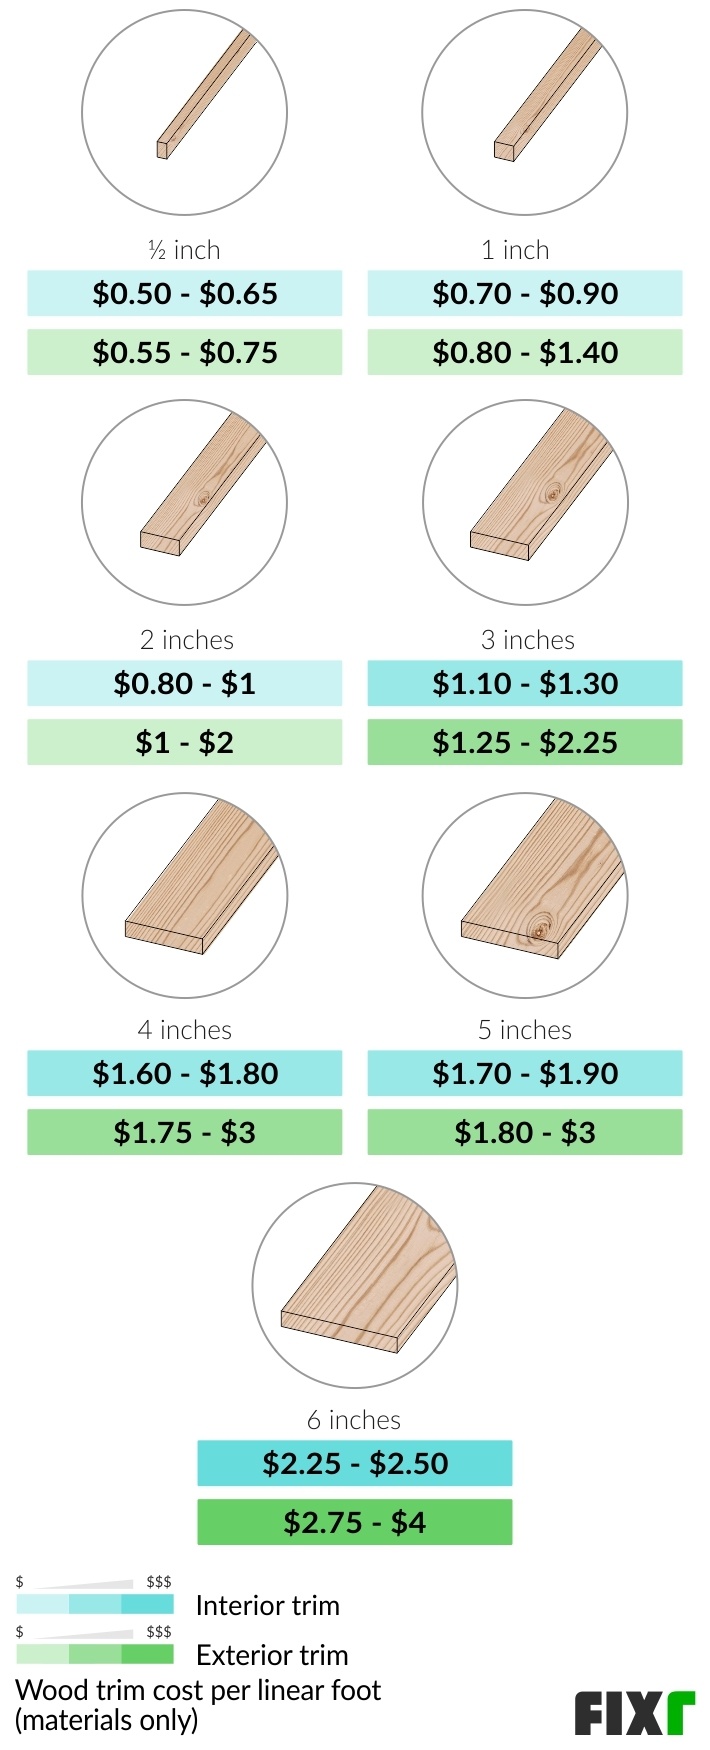 Cost per Linear Foot of a 1/2, 1, 2, 3, 4, 5, or 6-Inch Interior or Exterior Wood Trim